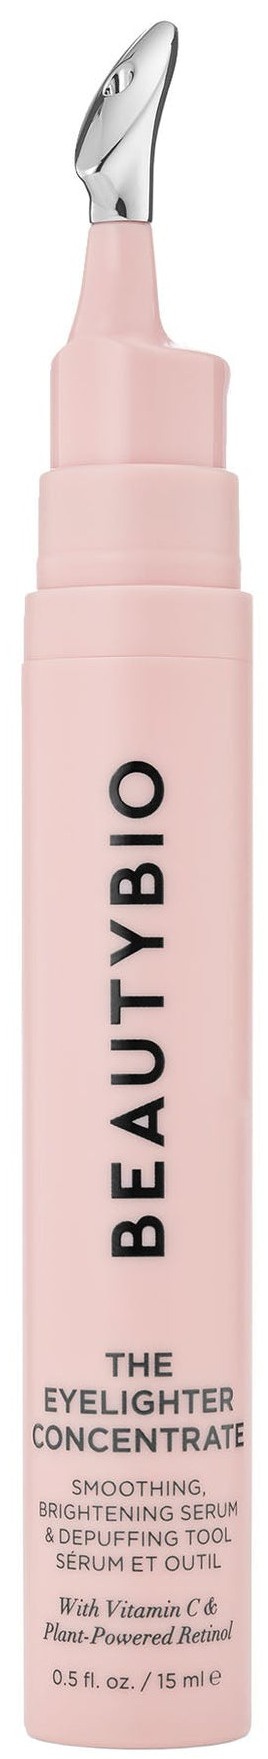 Beautybio The Eyelighter Concentrate